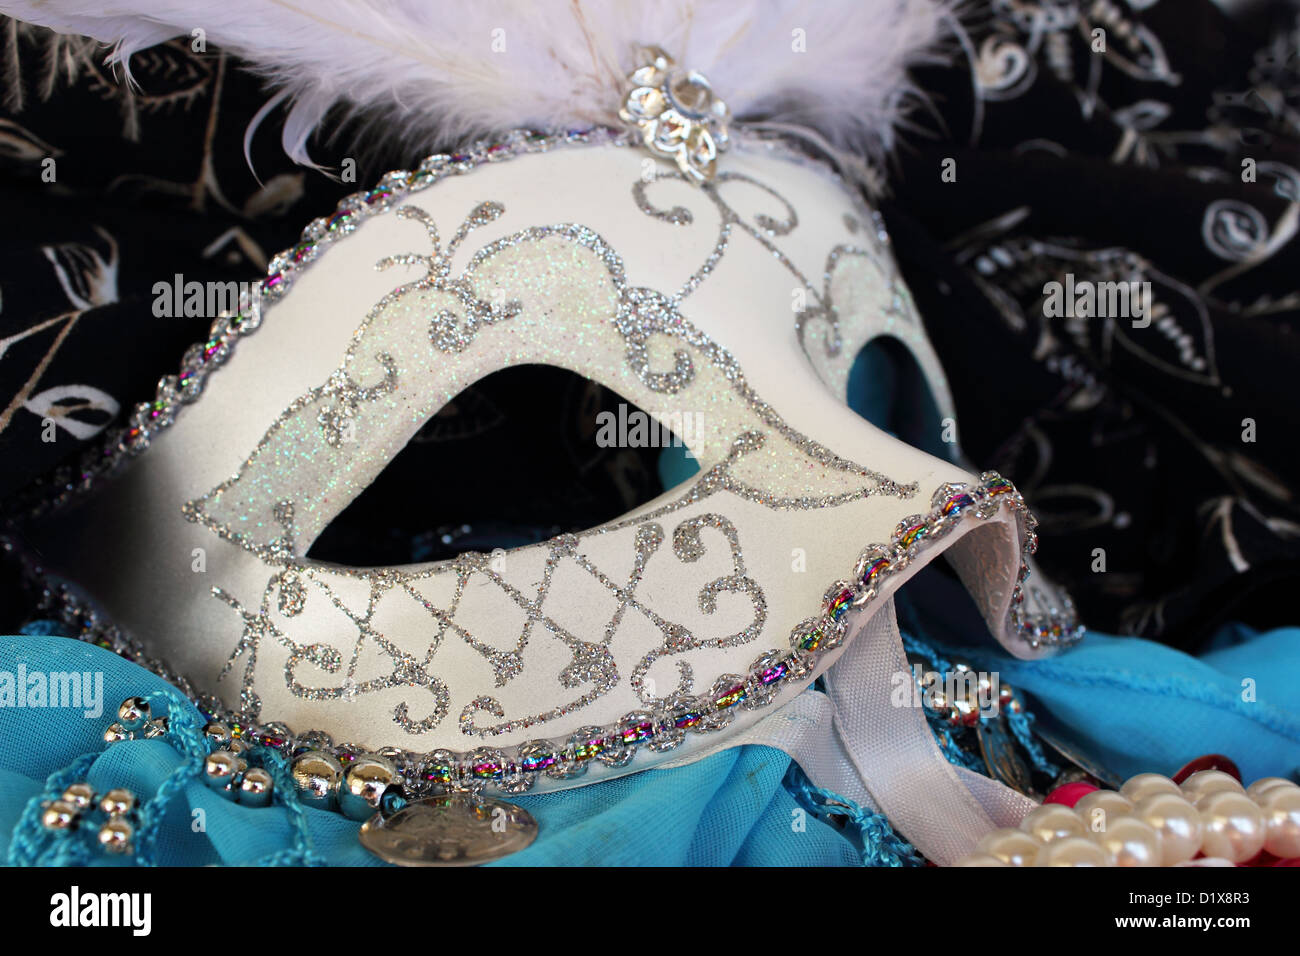 A masquerade ball mask adorned with glitter and rhinestons surrounded by party beads, bangles and fabrics Stock Photo